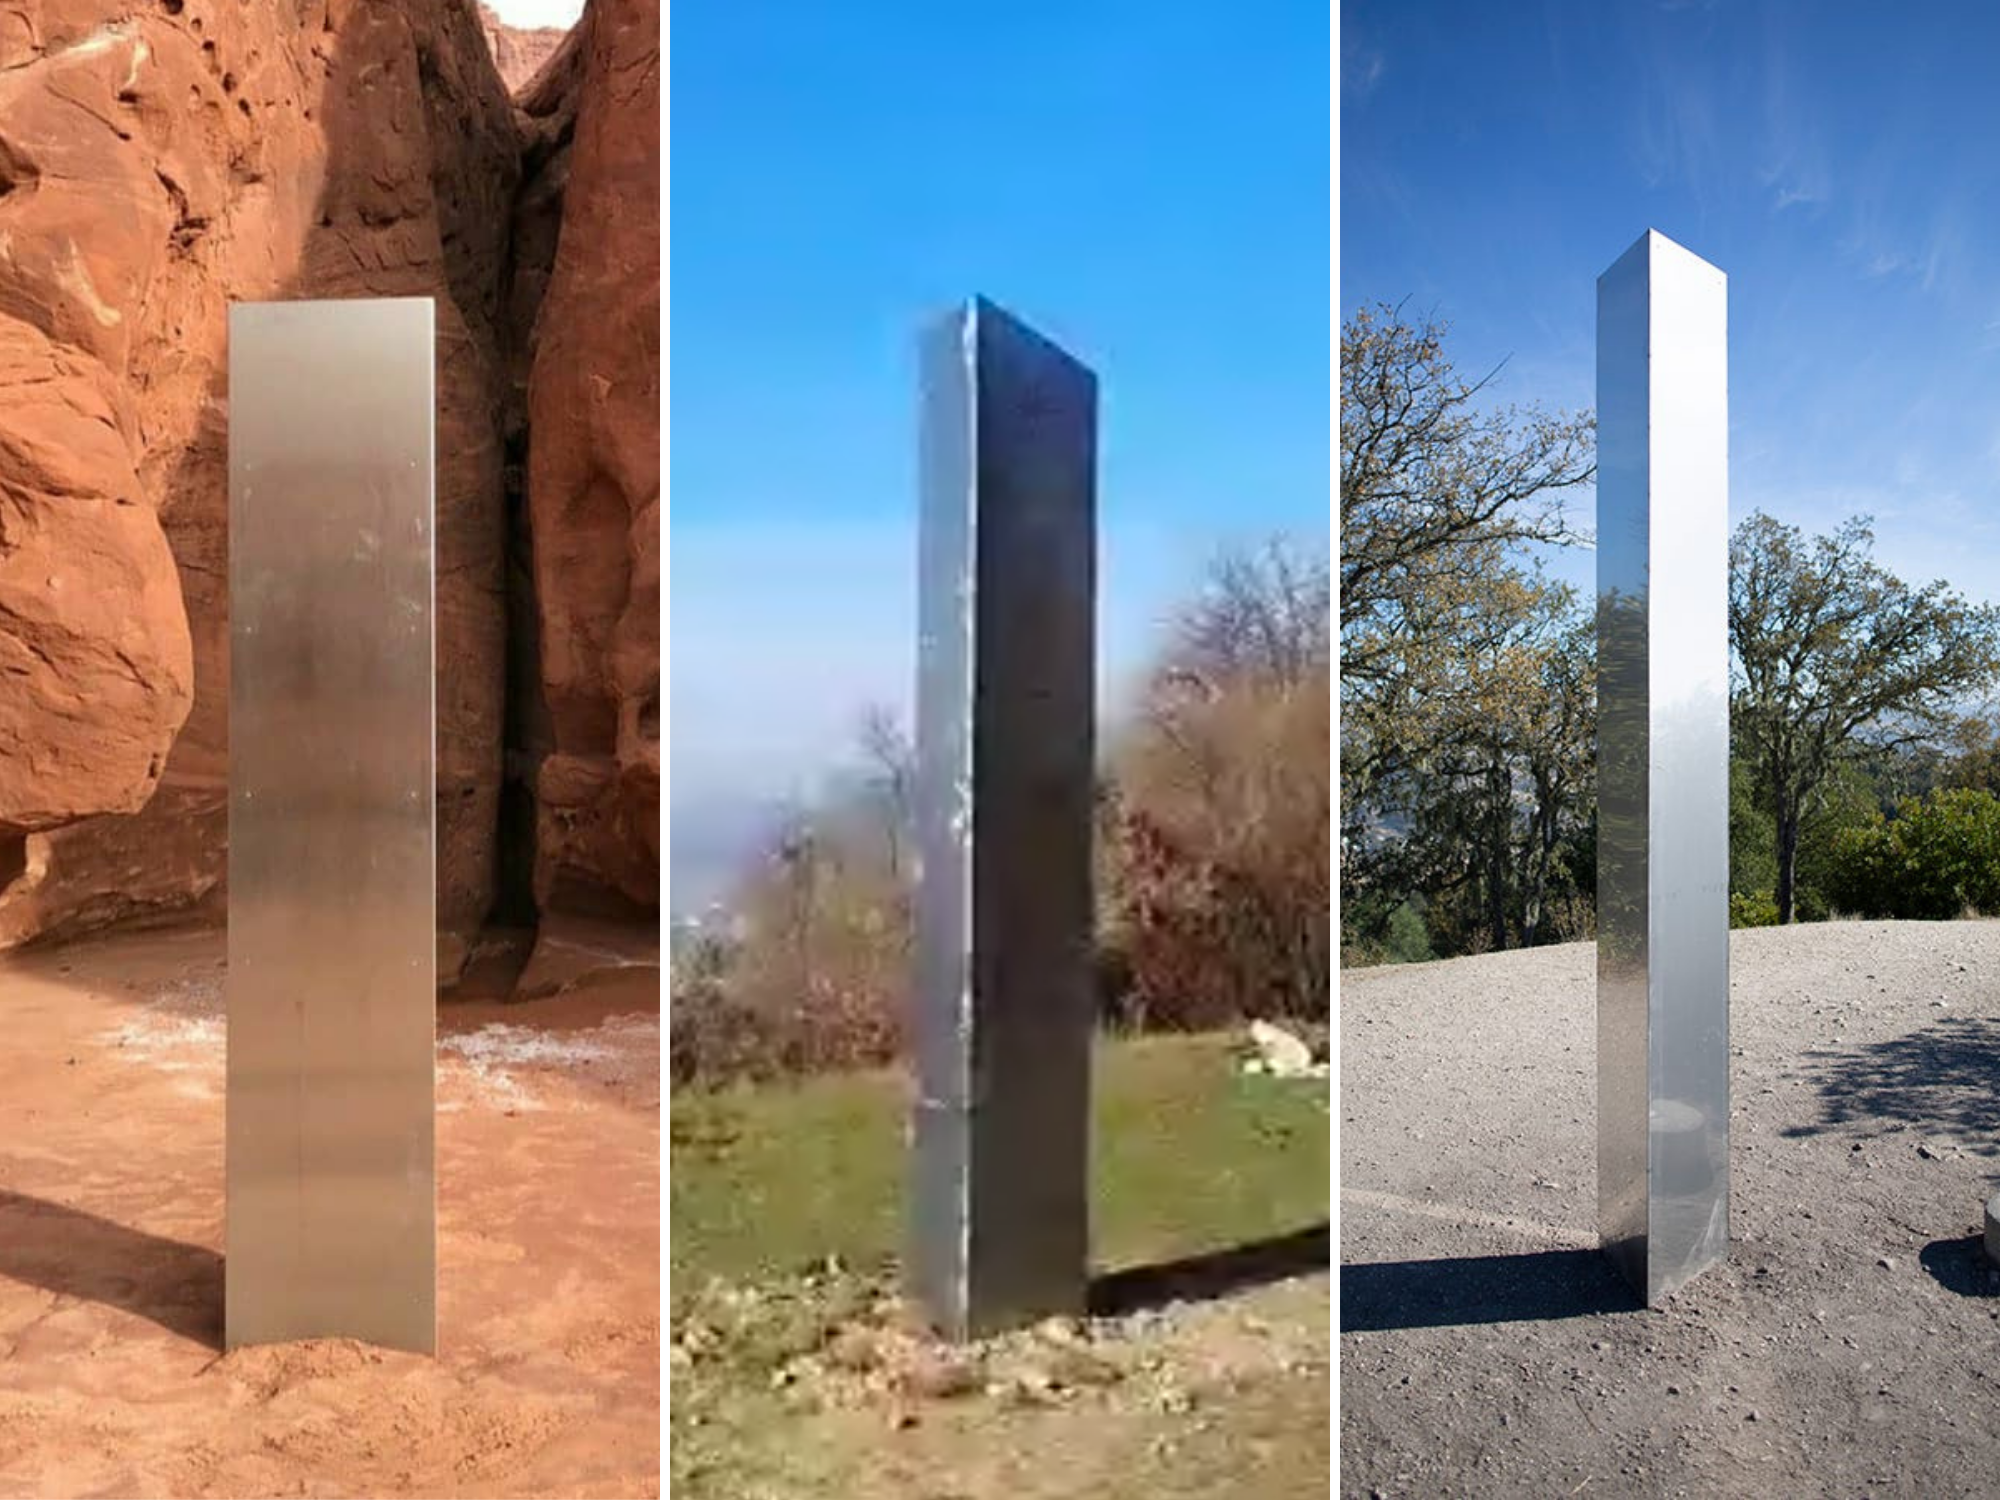 The hidden meaning in the mysterious monoliths appearing and